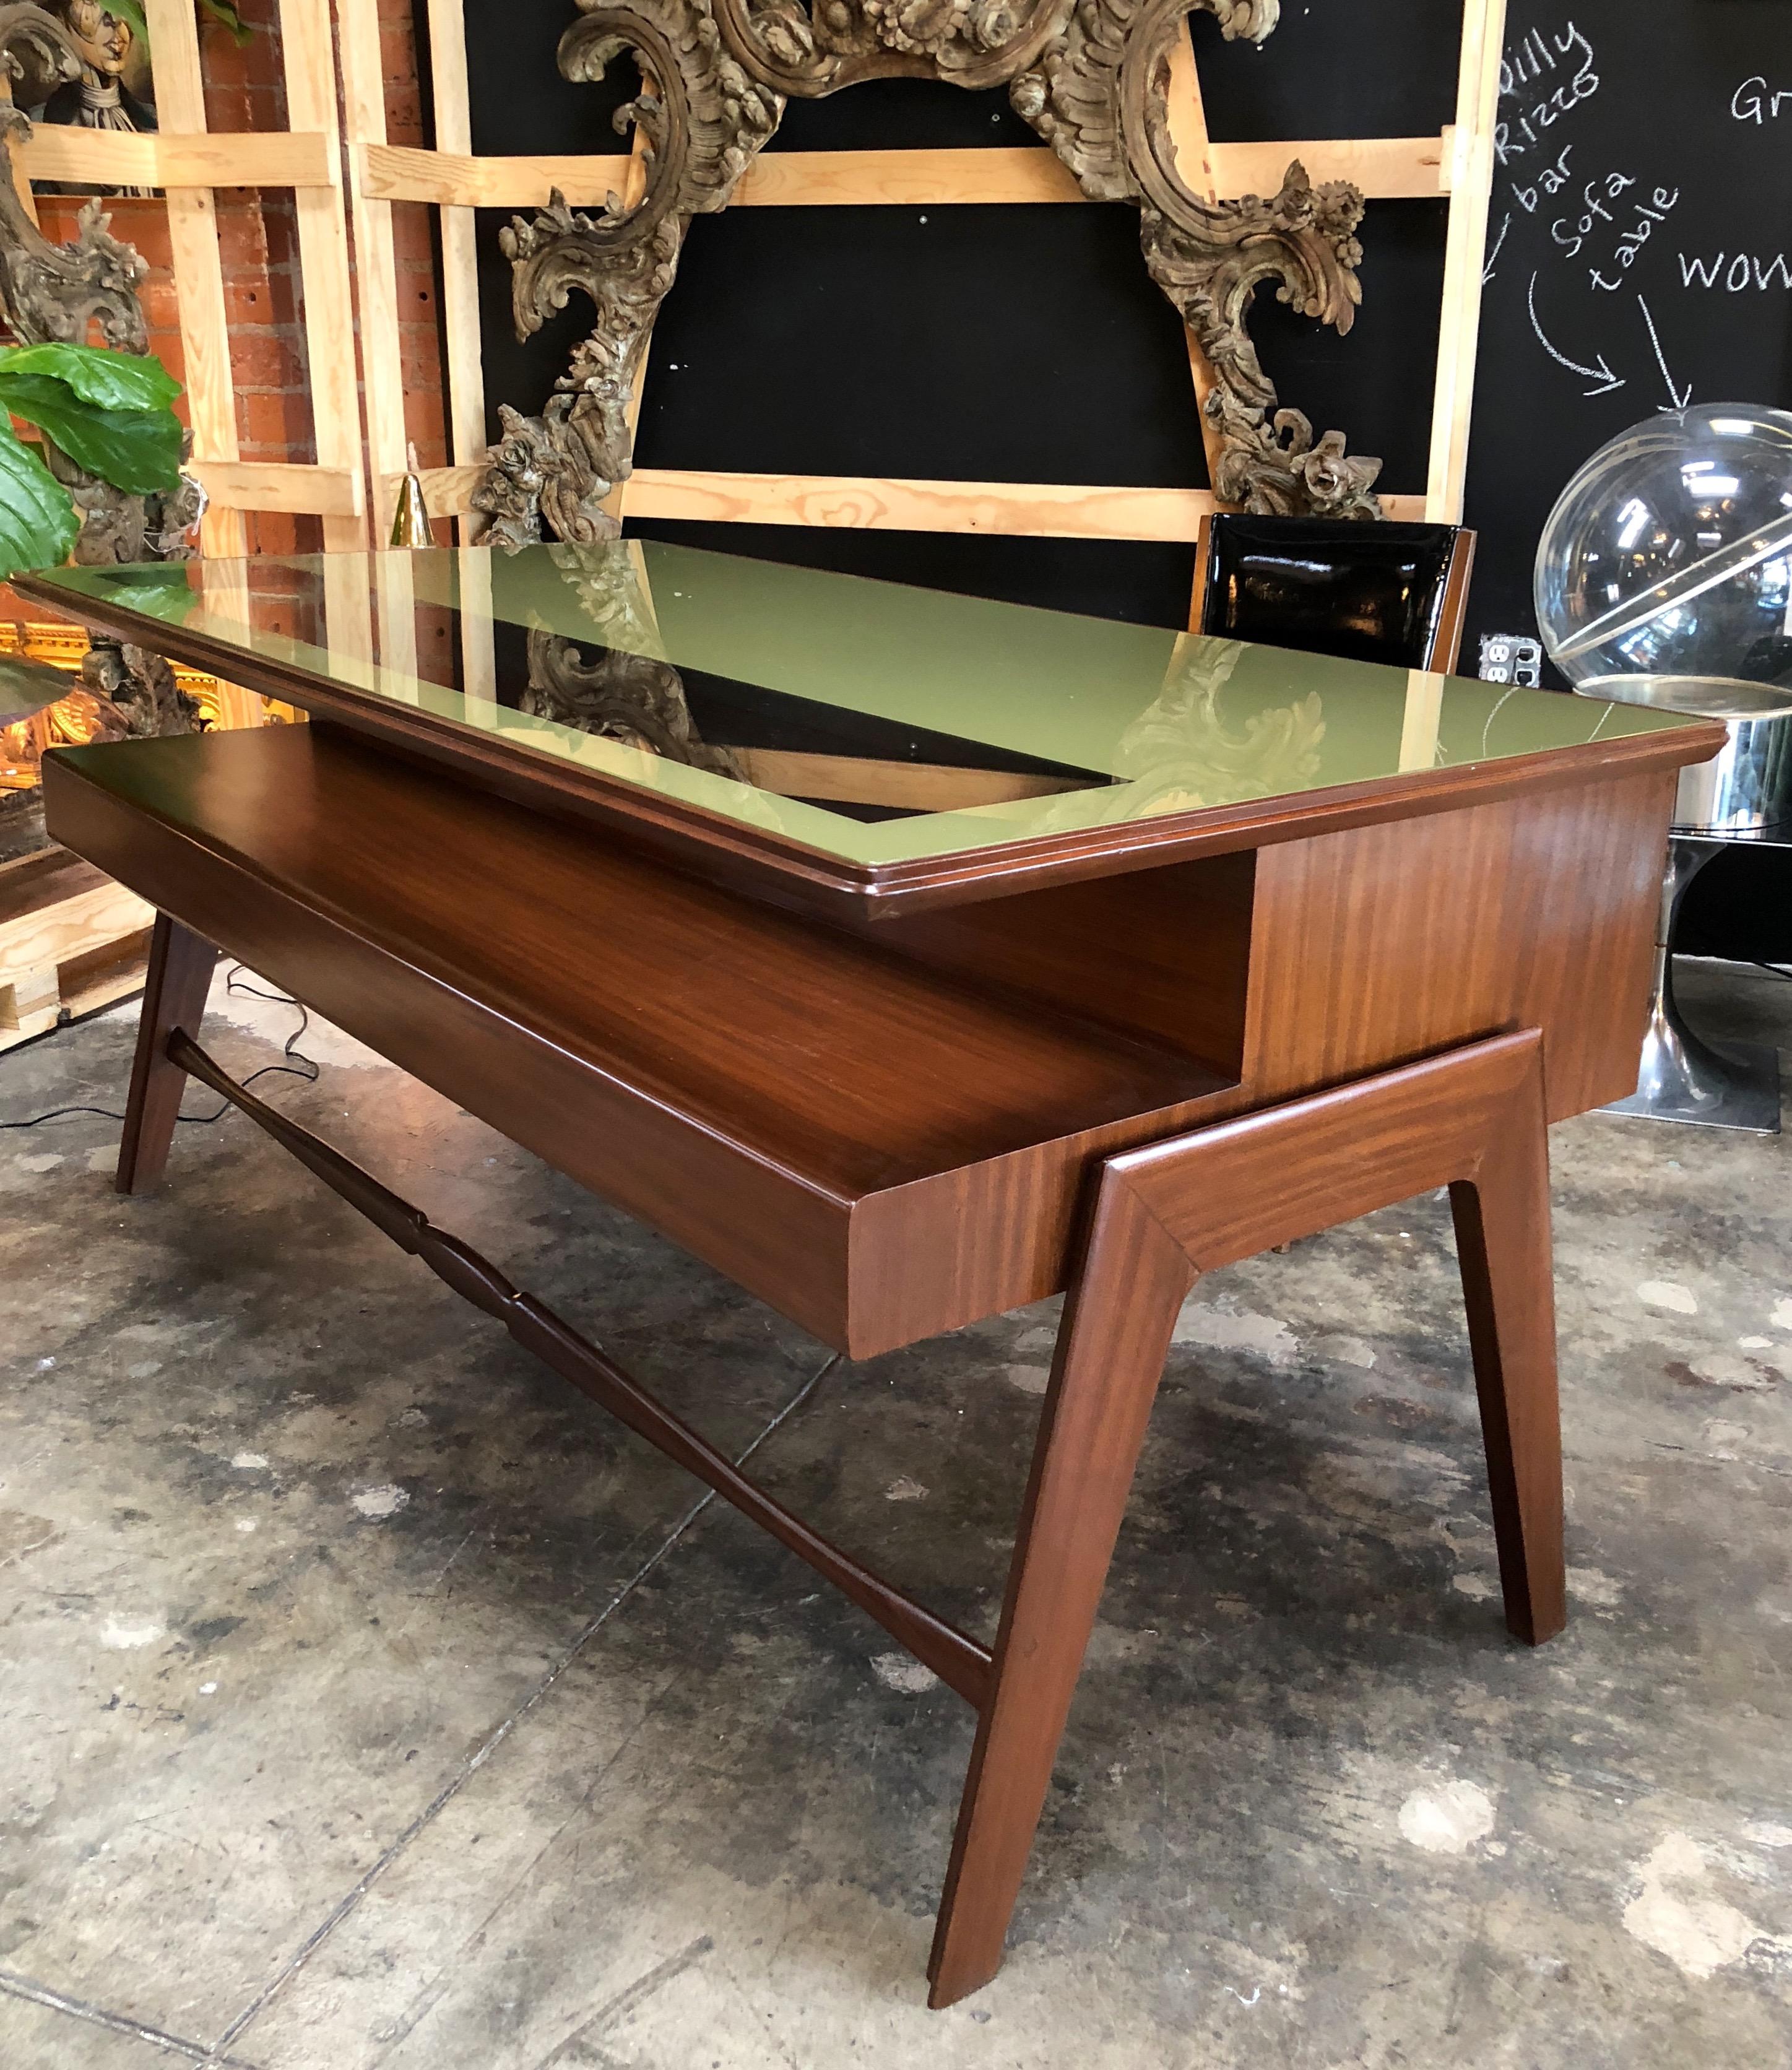 This rare Italian executive desk designed by Italian designer Vittorio Dassi is a model type produced in Italy in the 1950s and specifically dedicated to an audience formed by professionals and senior managers. It has a rosewood structure with